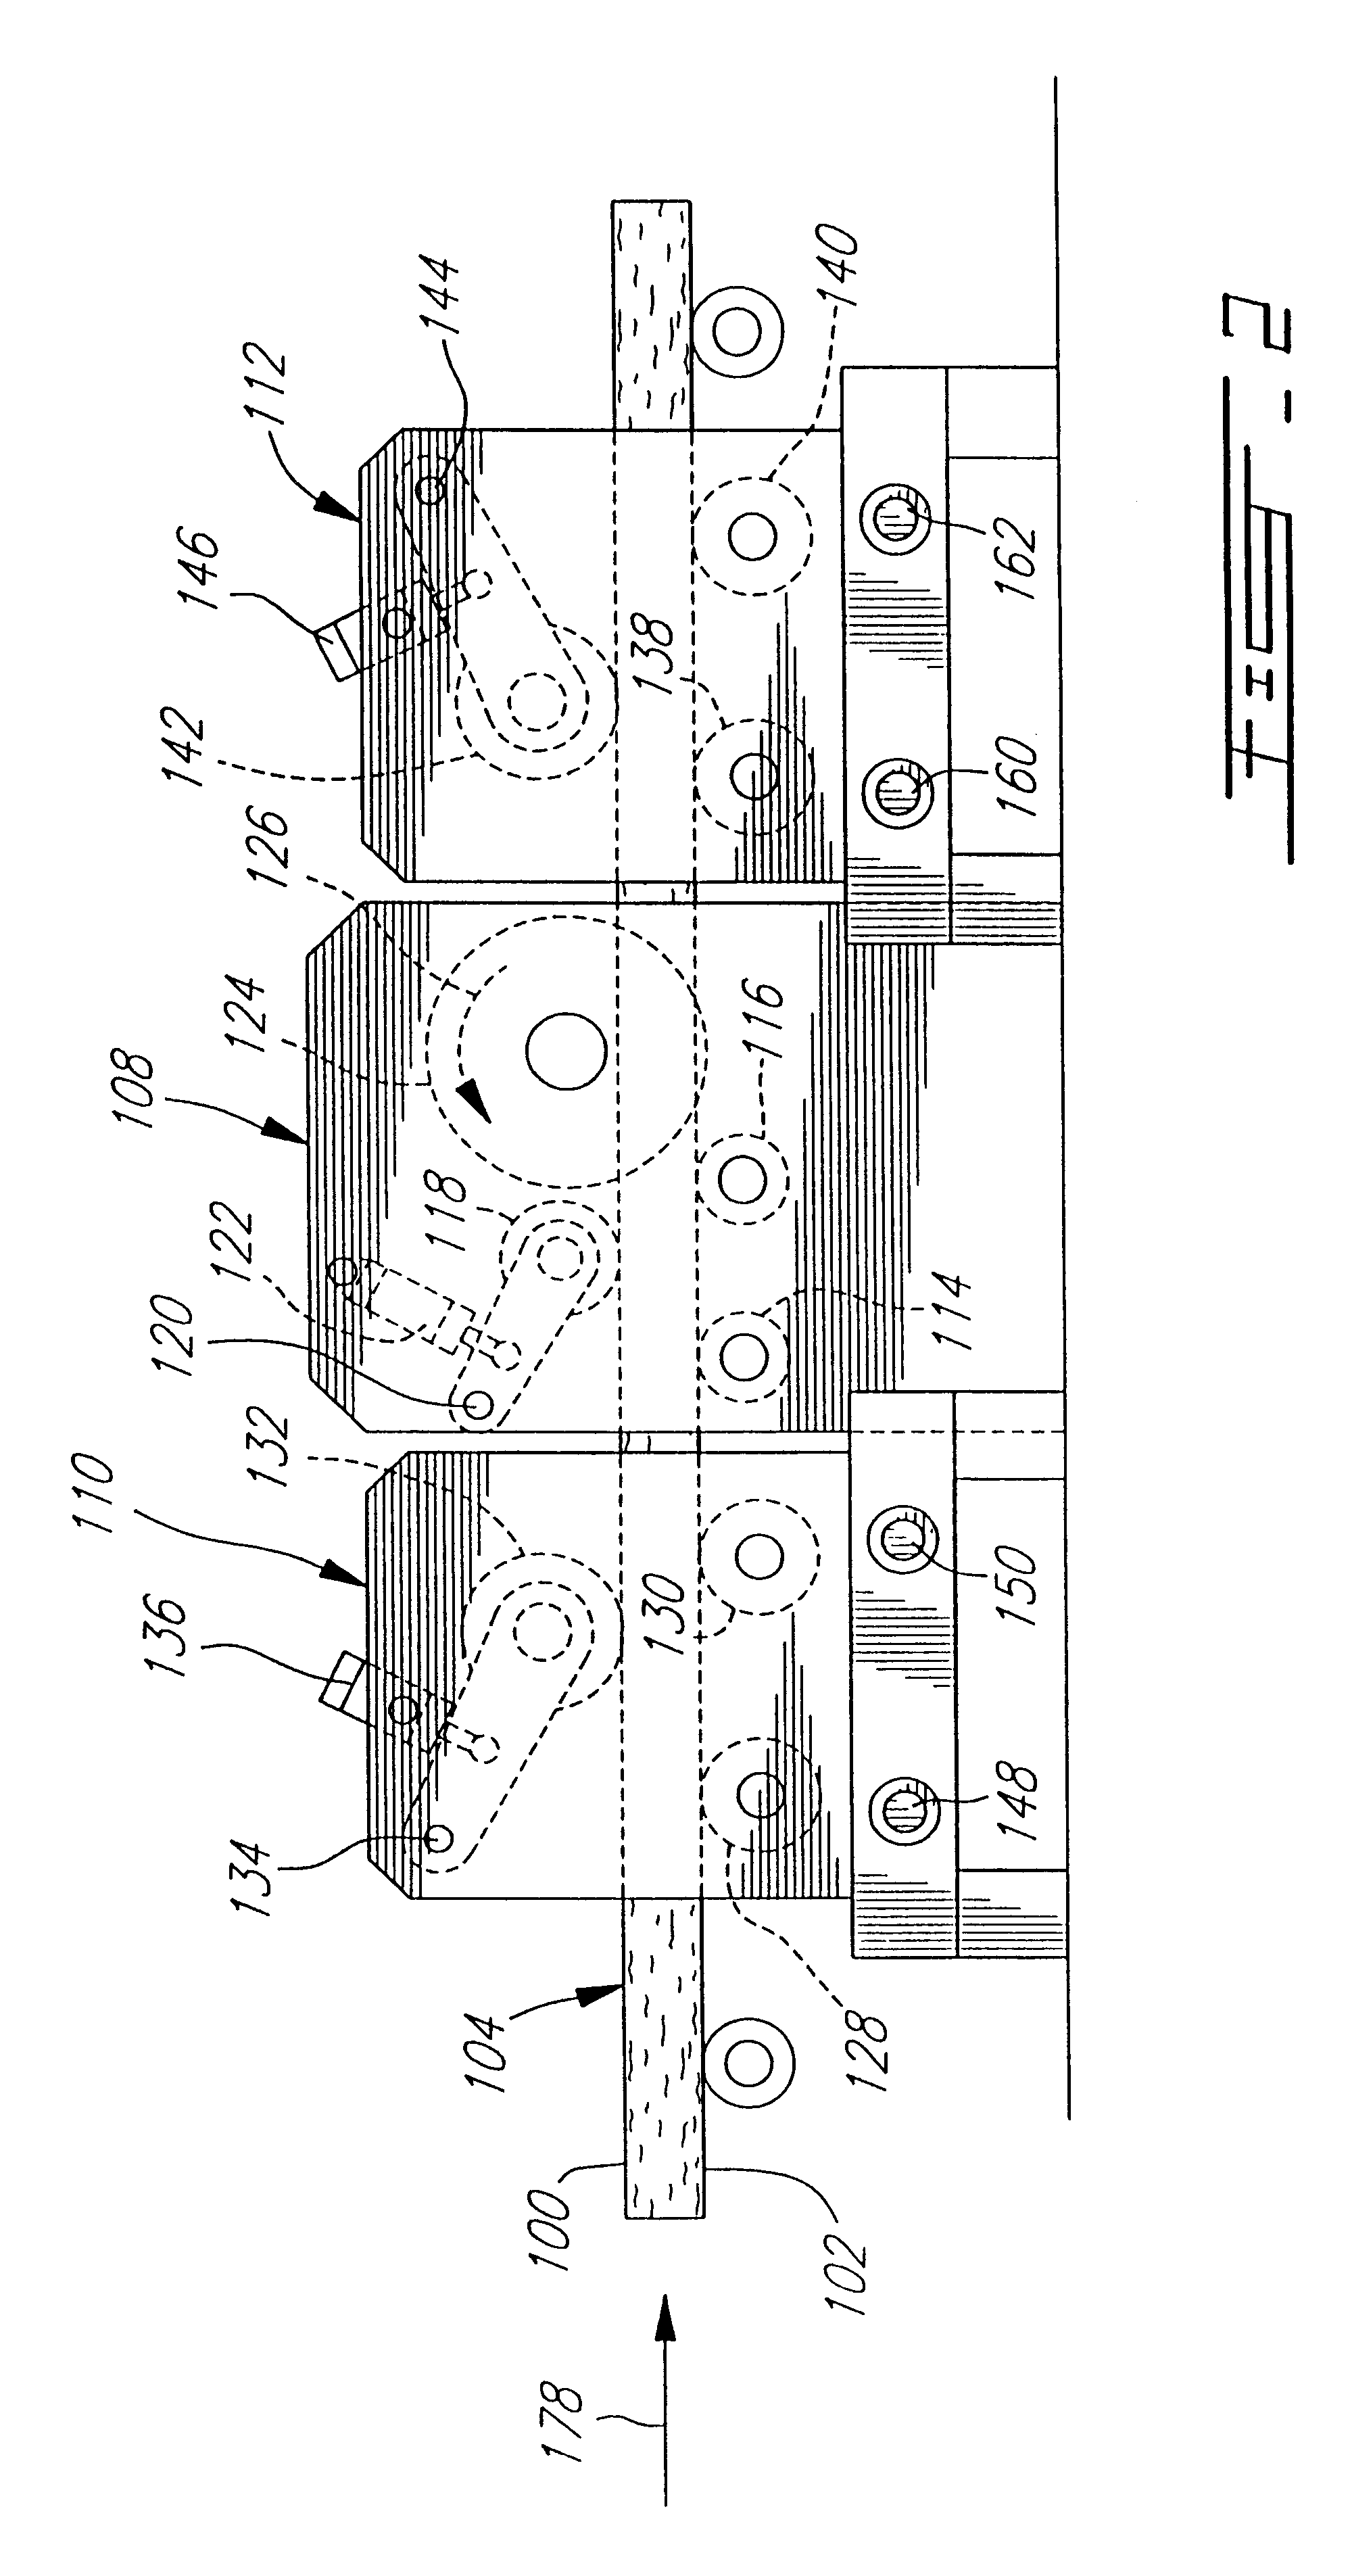 Apparatus for controlled curved sawing or cutting of two-faced cants